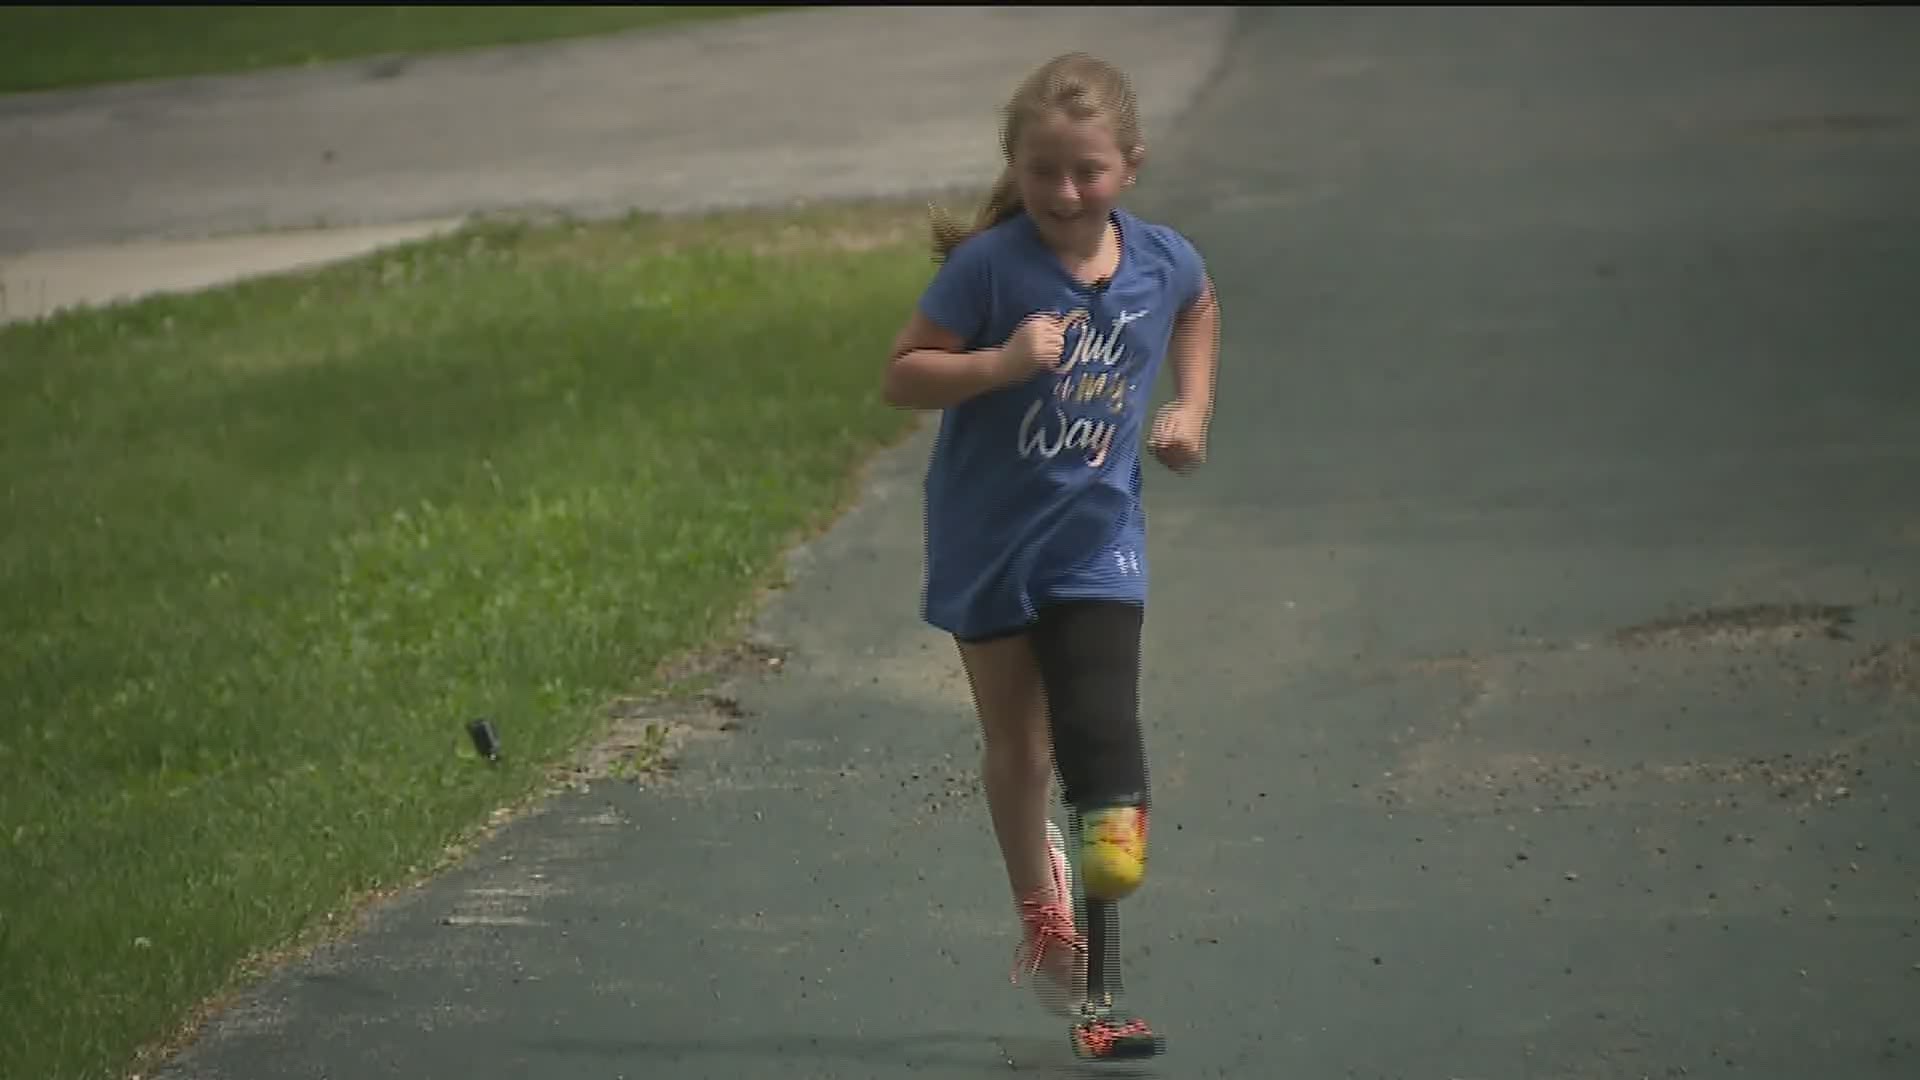 Maizie's new prosthetic running blade was a gift from the group called 50Legs in Florida.